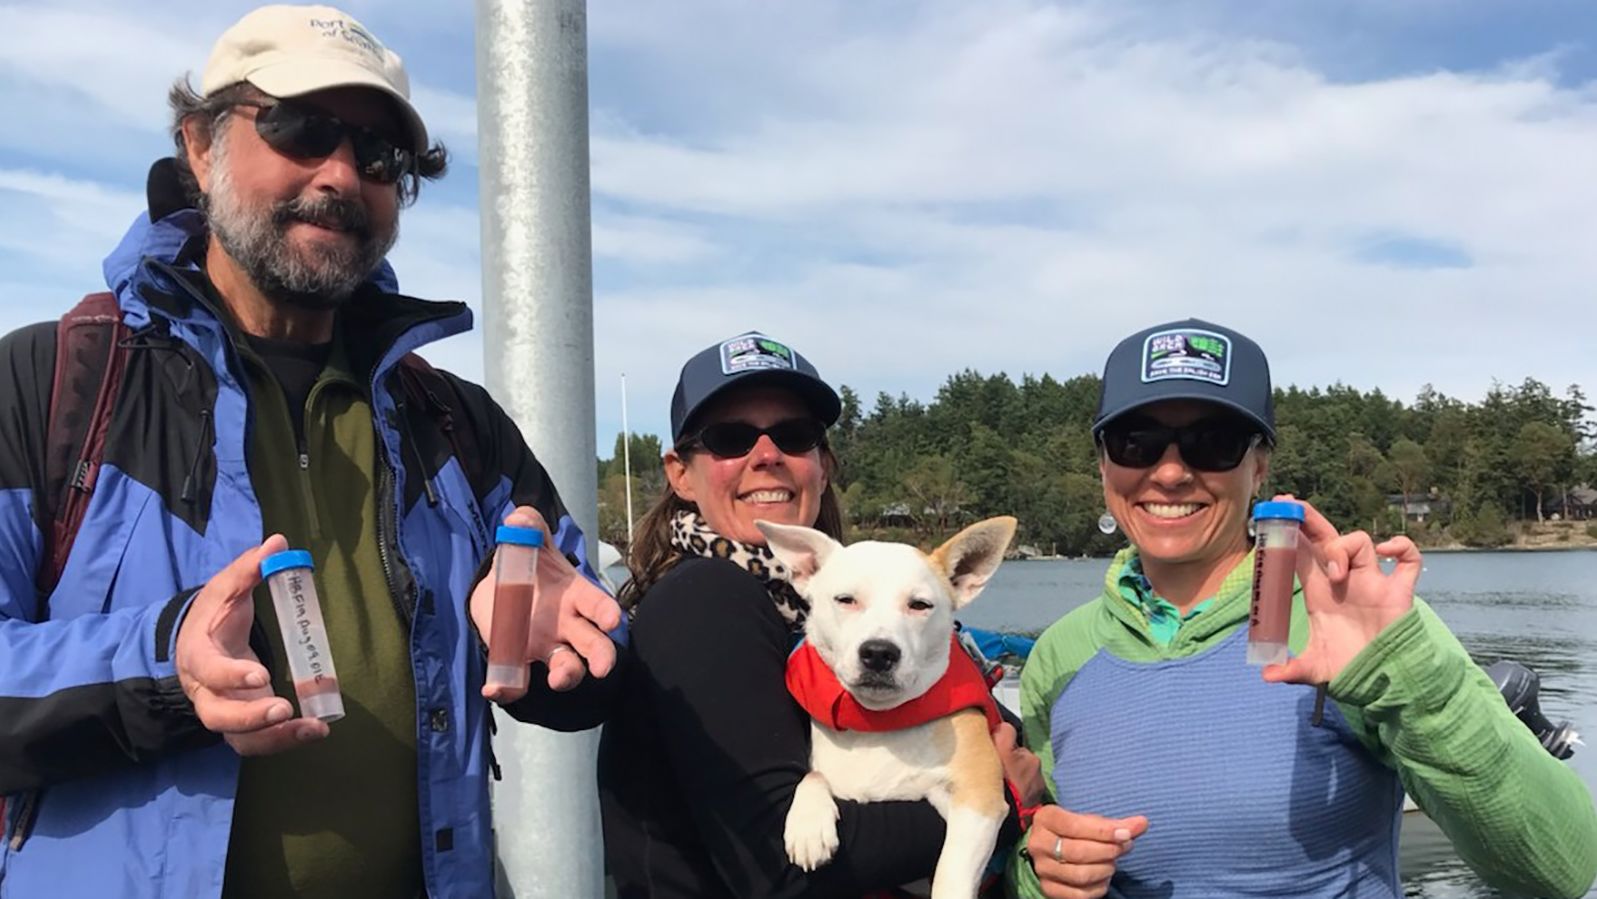 Eba the Whale Dog tracks the scat of wildlife through the Conservation Canines program. She's shown with scientists (from left) Samuel Wasser, Deborah Giles and Sadie Youngstrom.